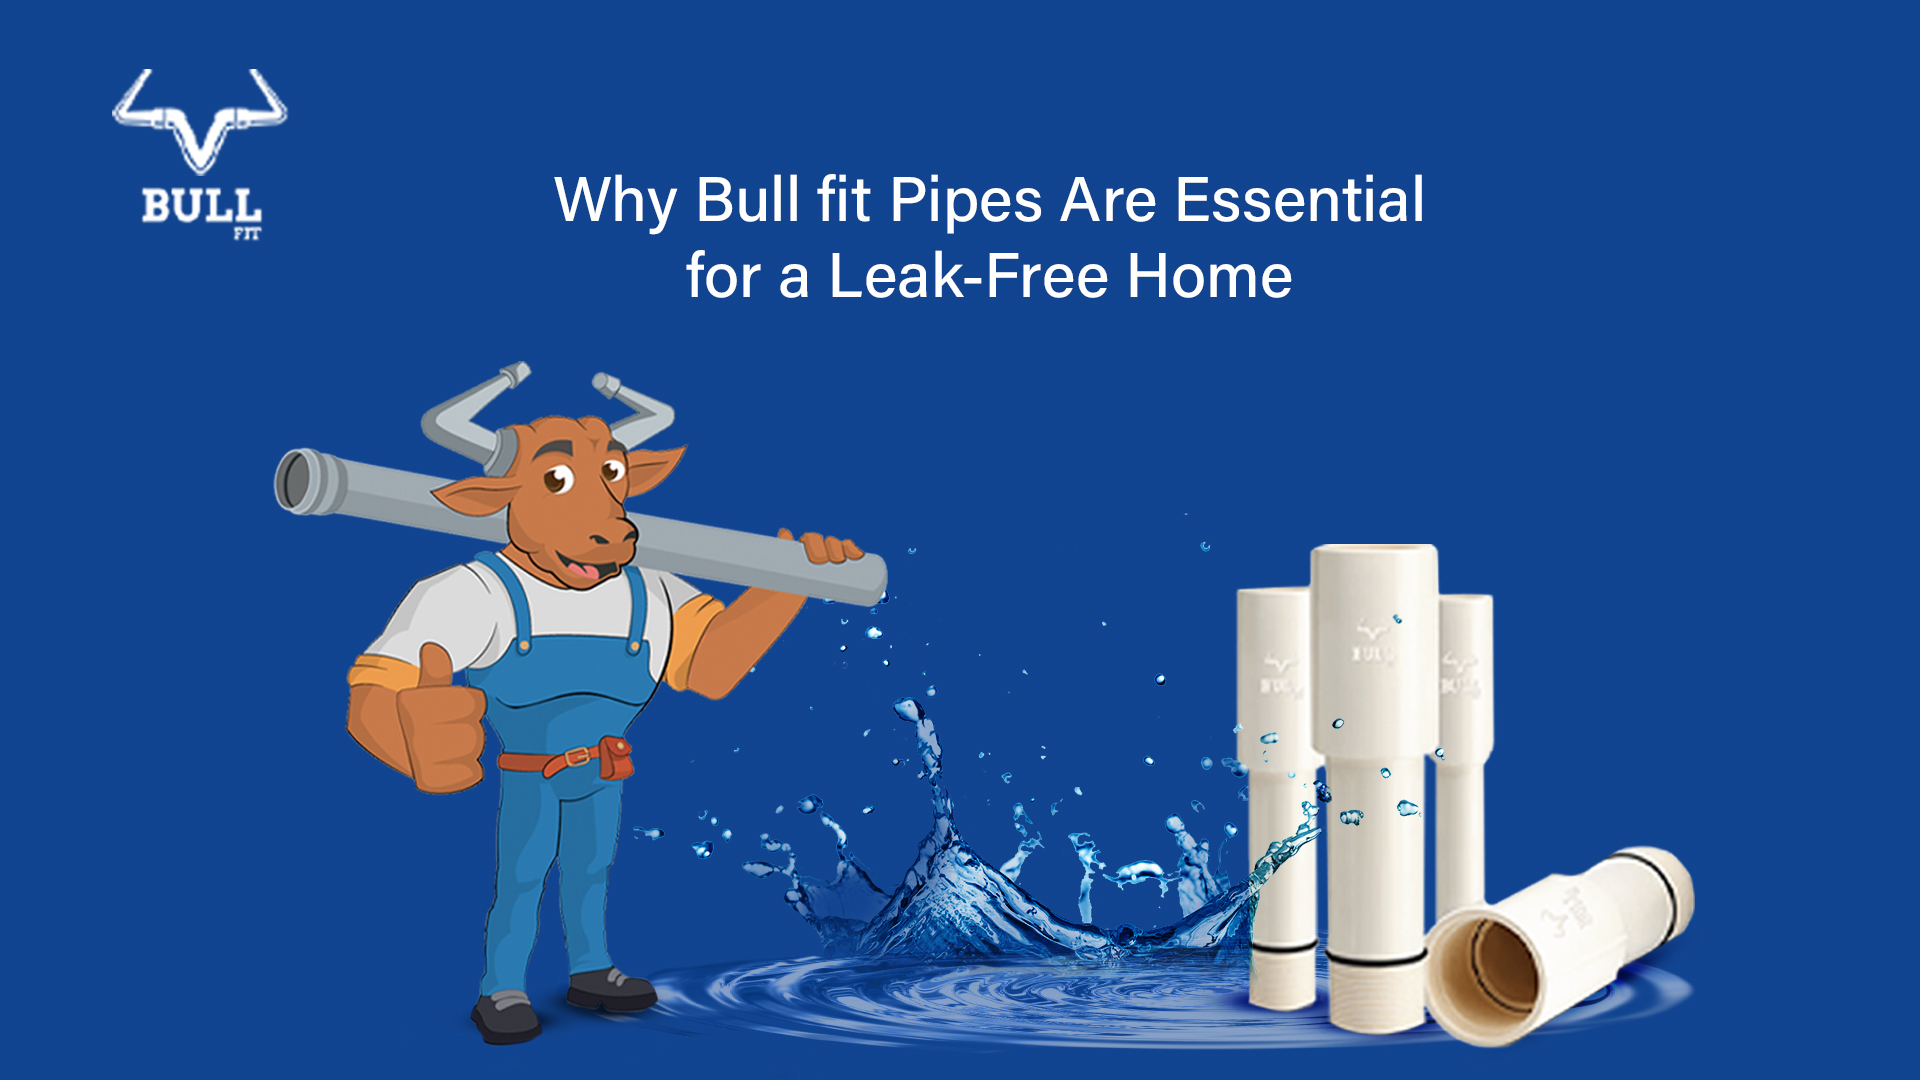 Bull Fit Pipes Are Essential for a Leak-Free Home